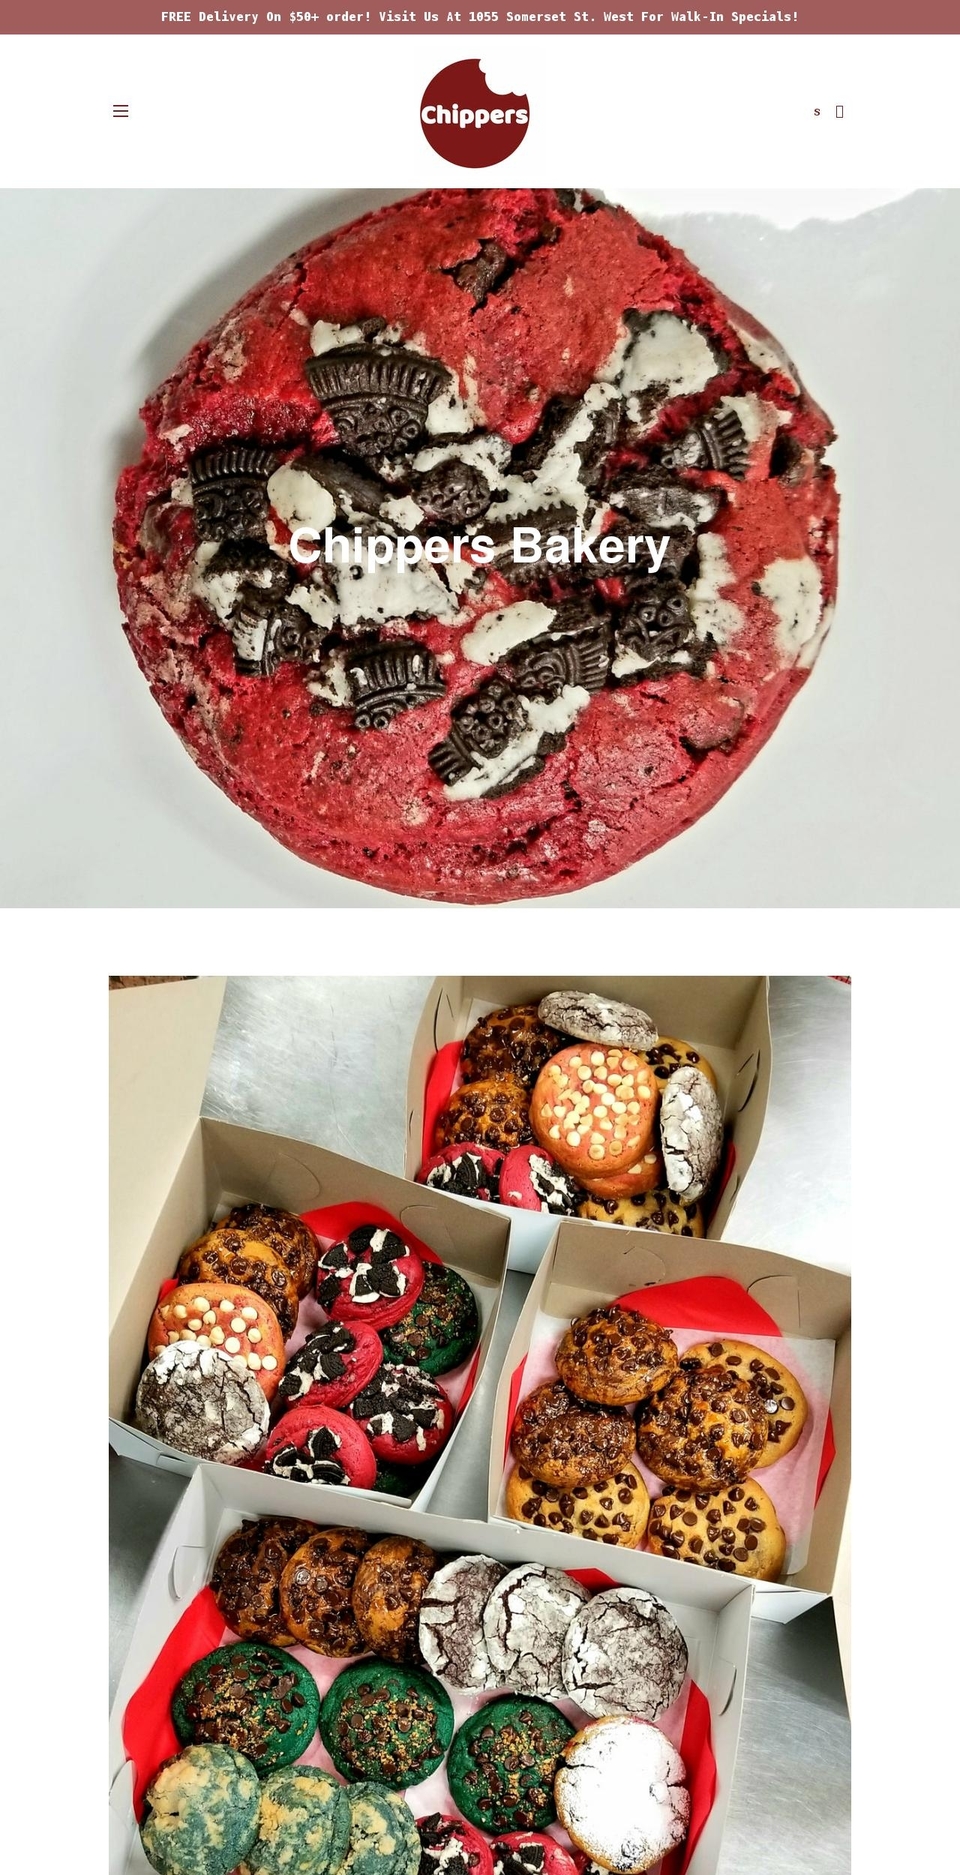 Bakery Shopify theme site example chippersbakery.com